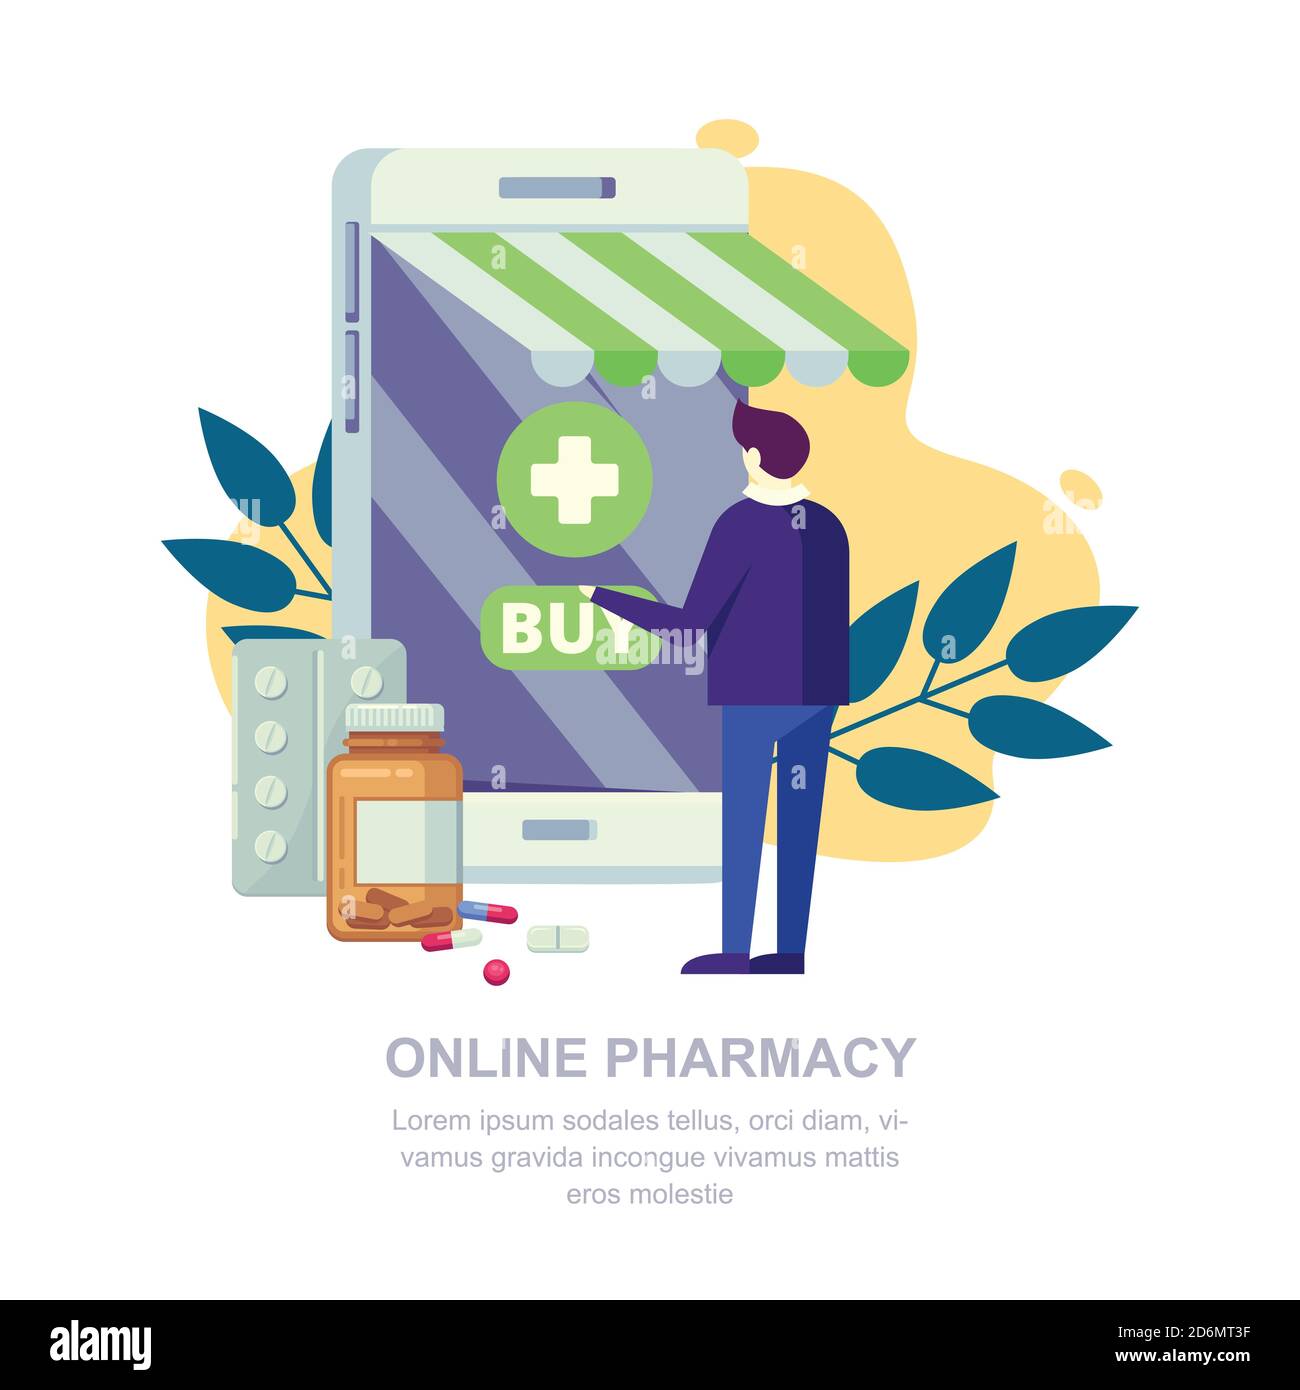 Online pharmacy store, vector flat illustration. Man and drugstore on smartphone screen. Medicine and healthcare mobile app concept. Stock Vector